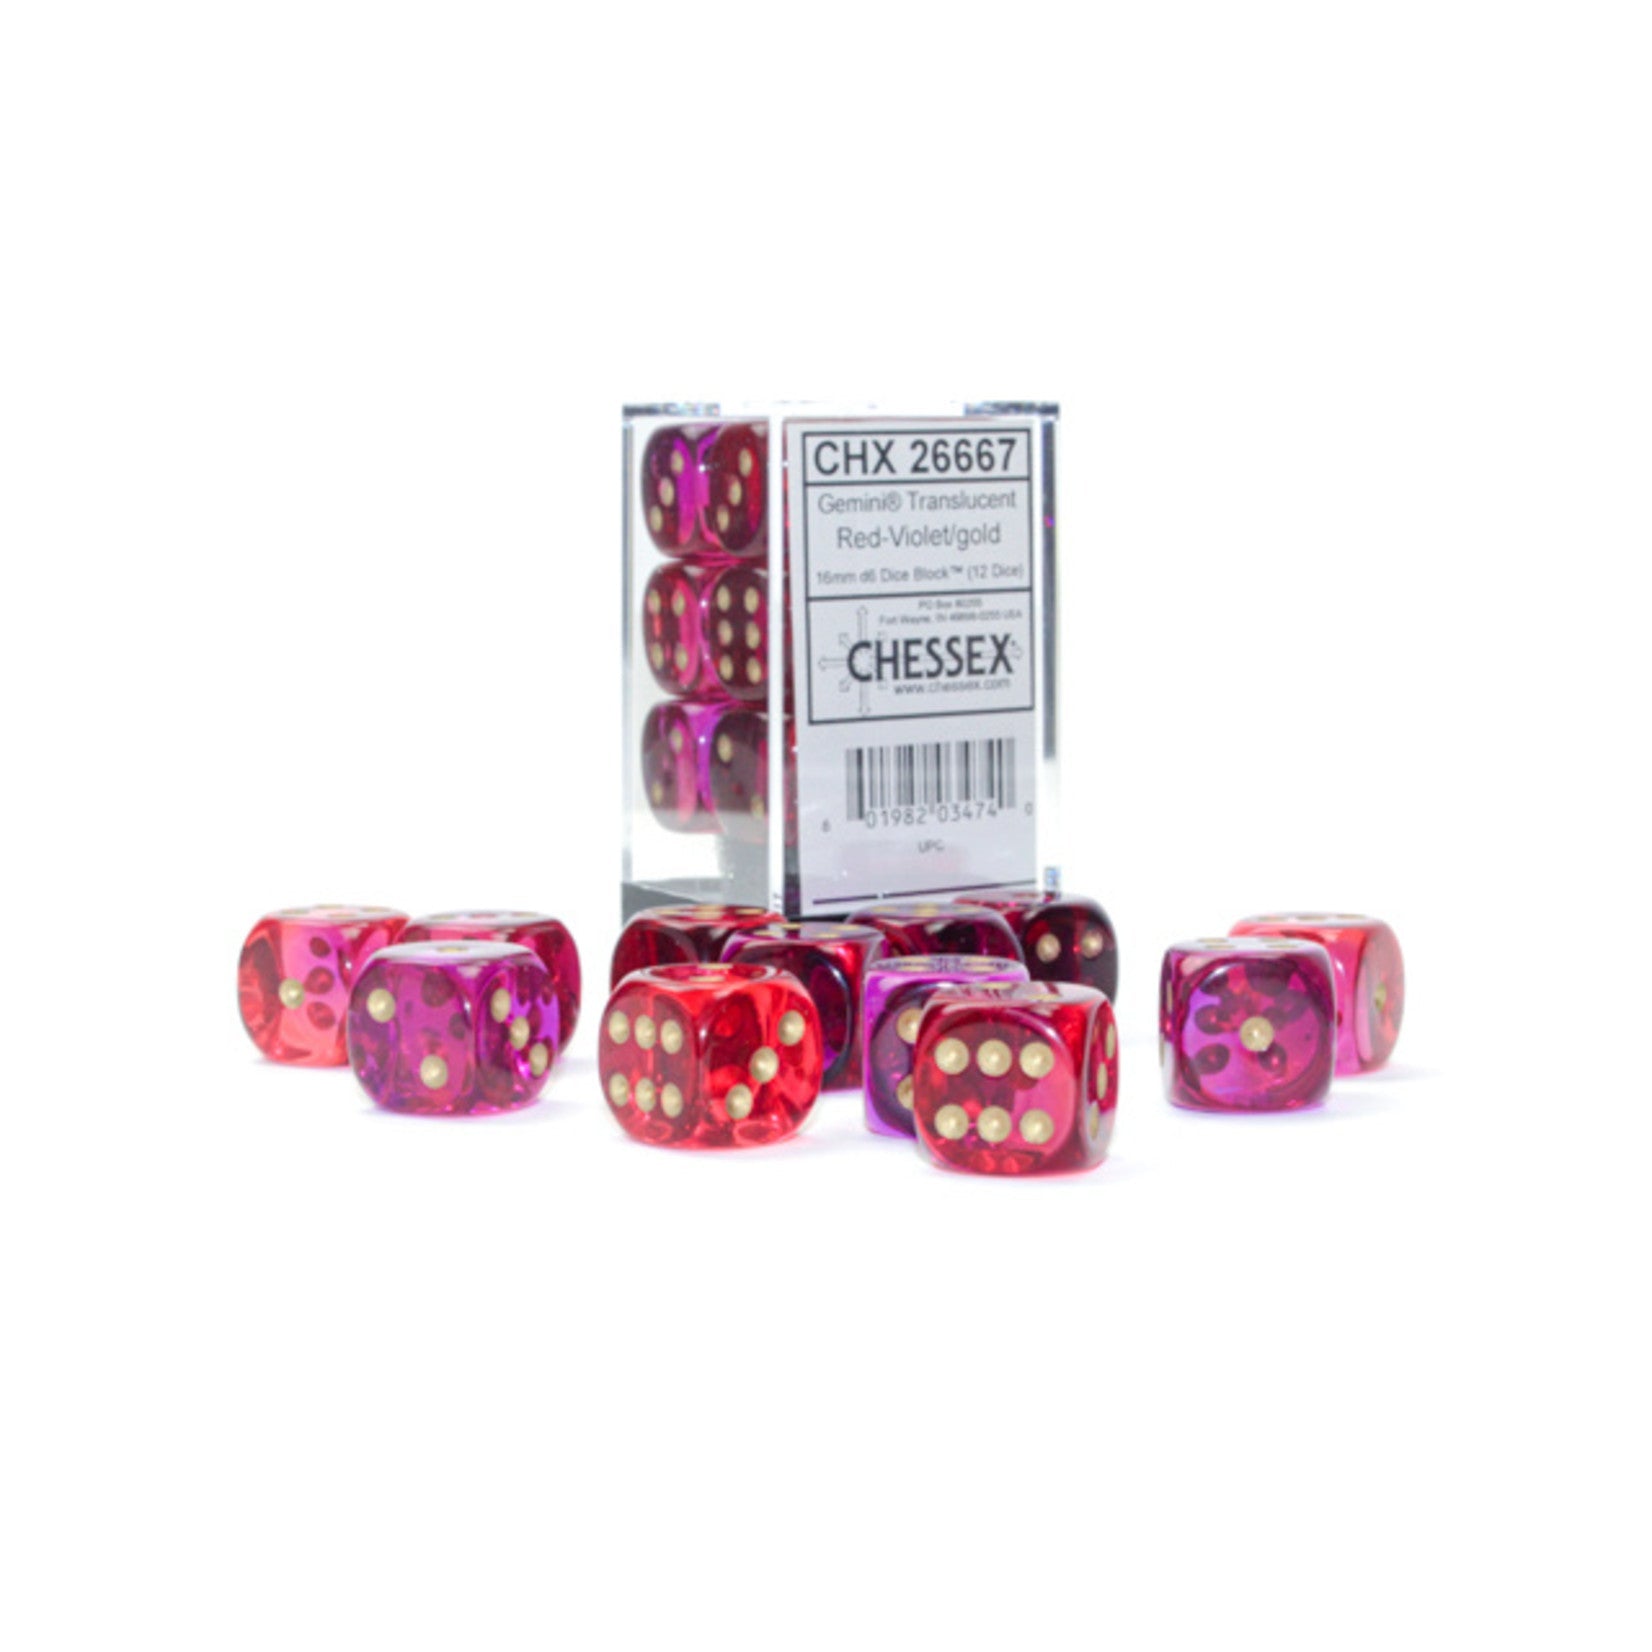 Chessex Gemini Translucent Red-Violet/Gold 12d6 16mm | Silver Goblin